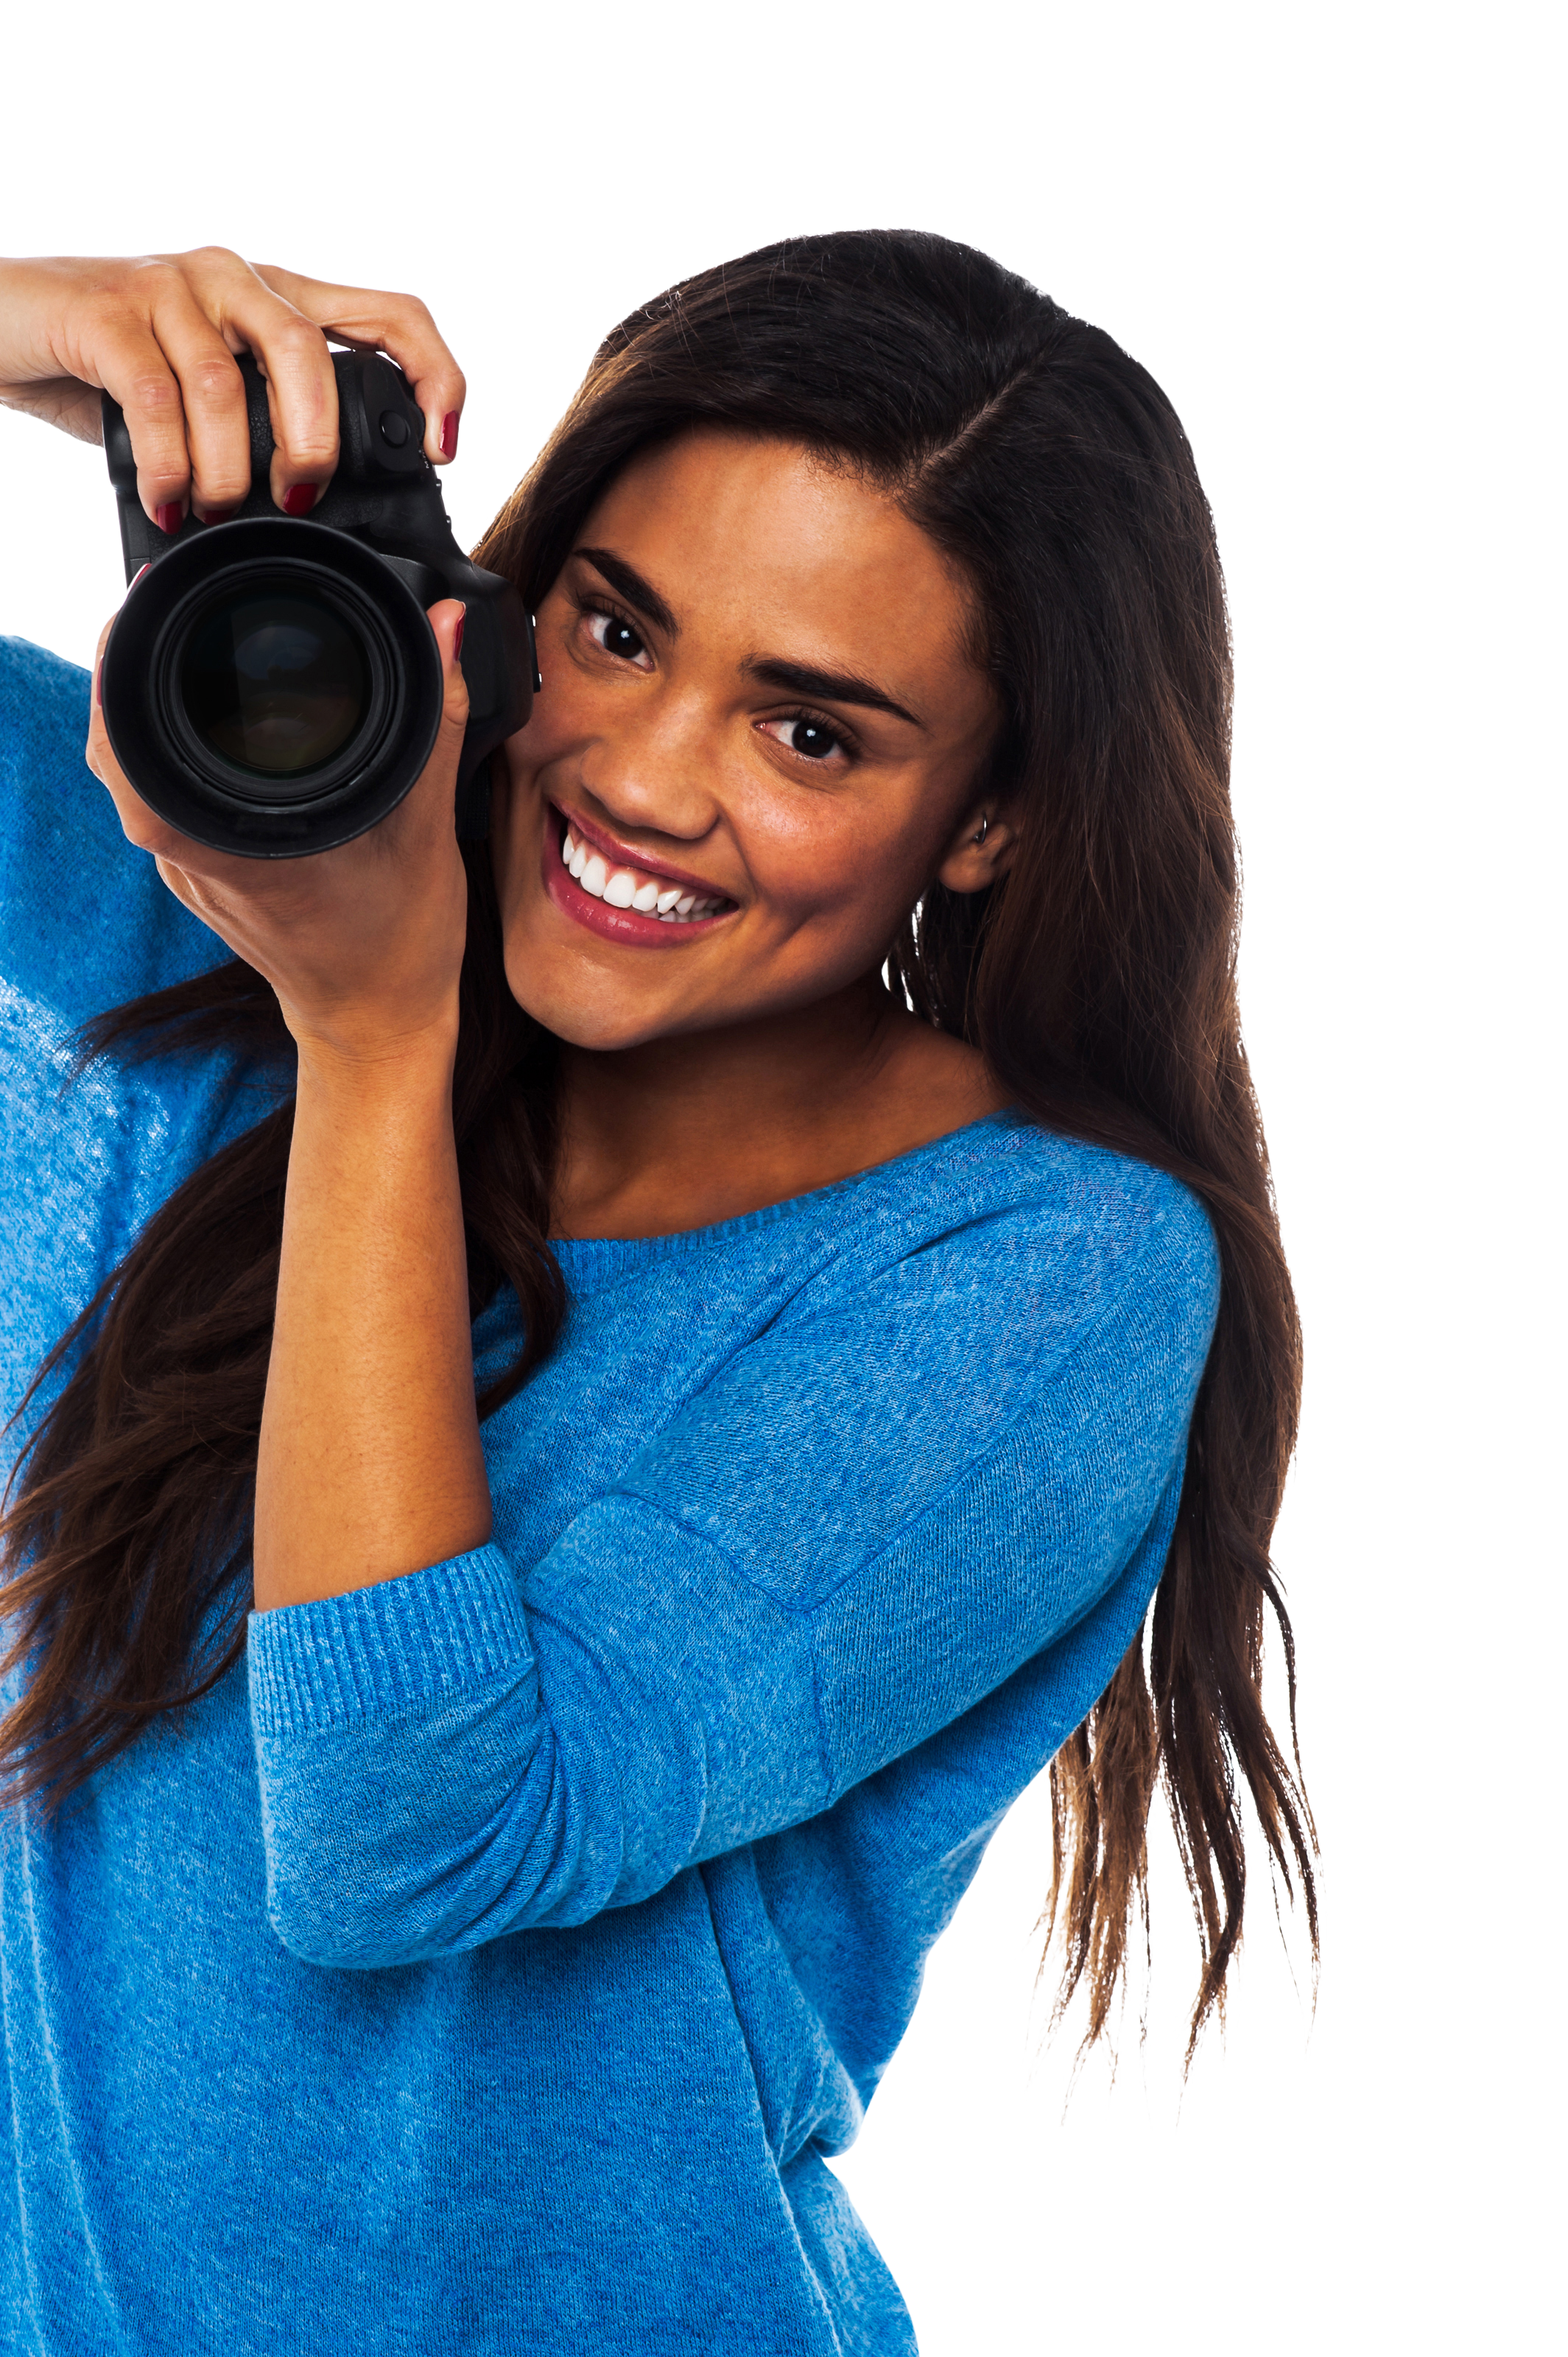 Photographer PNG Image